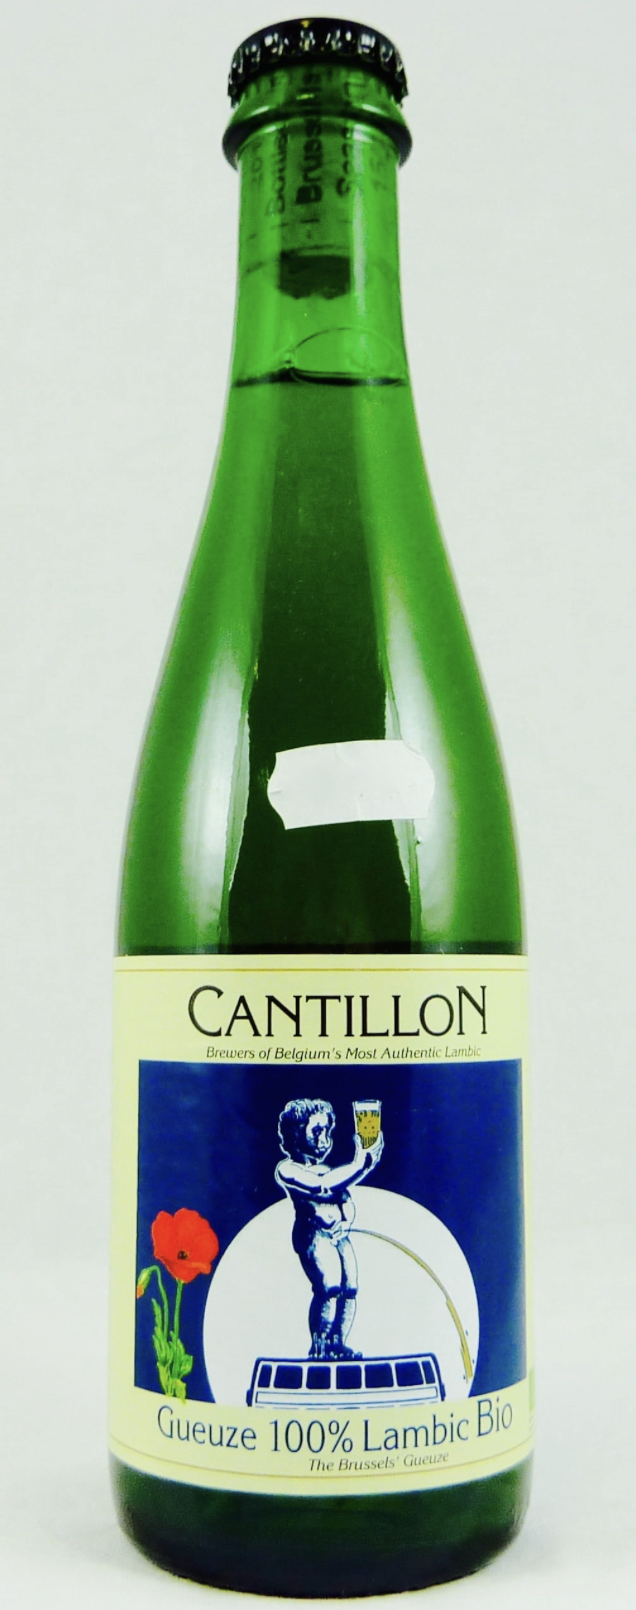 A bottle of Cantillon Gueuze Lambic. A truly exceptional beer.